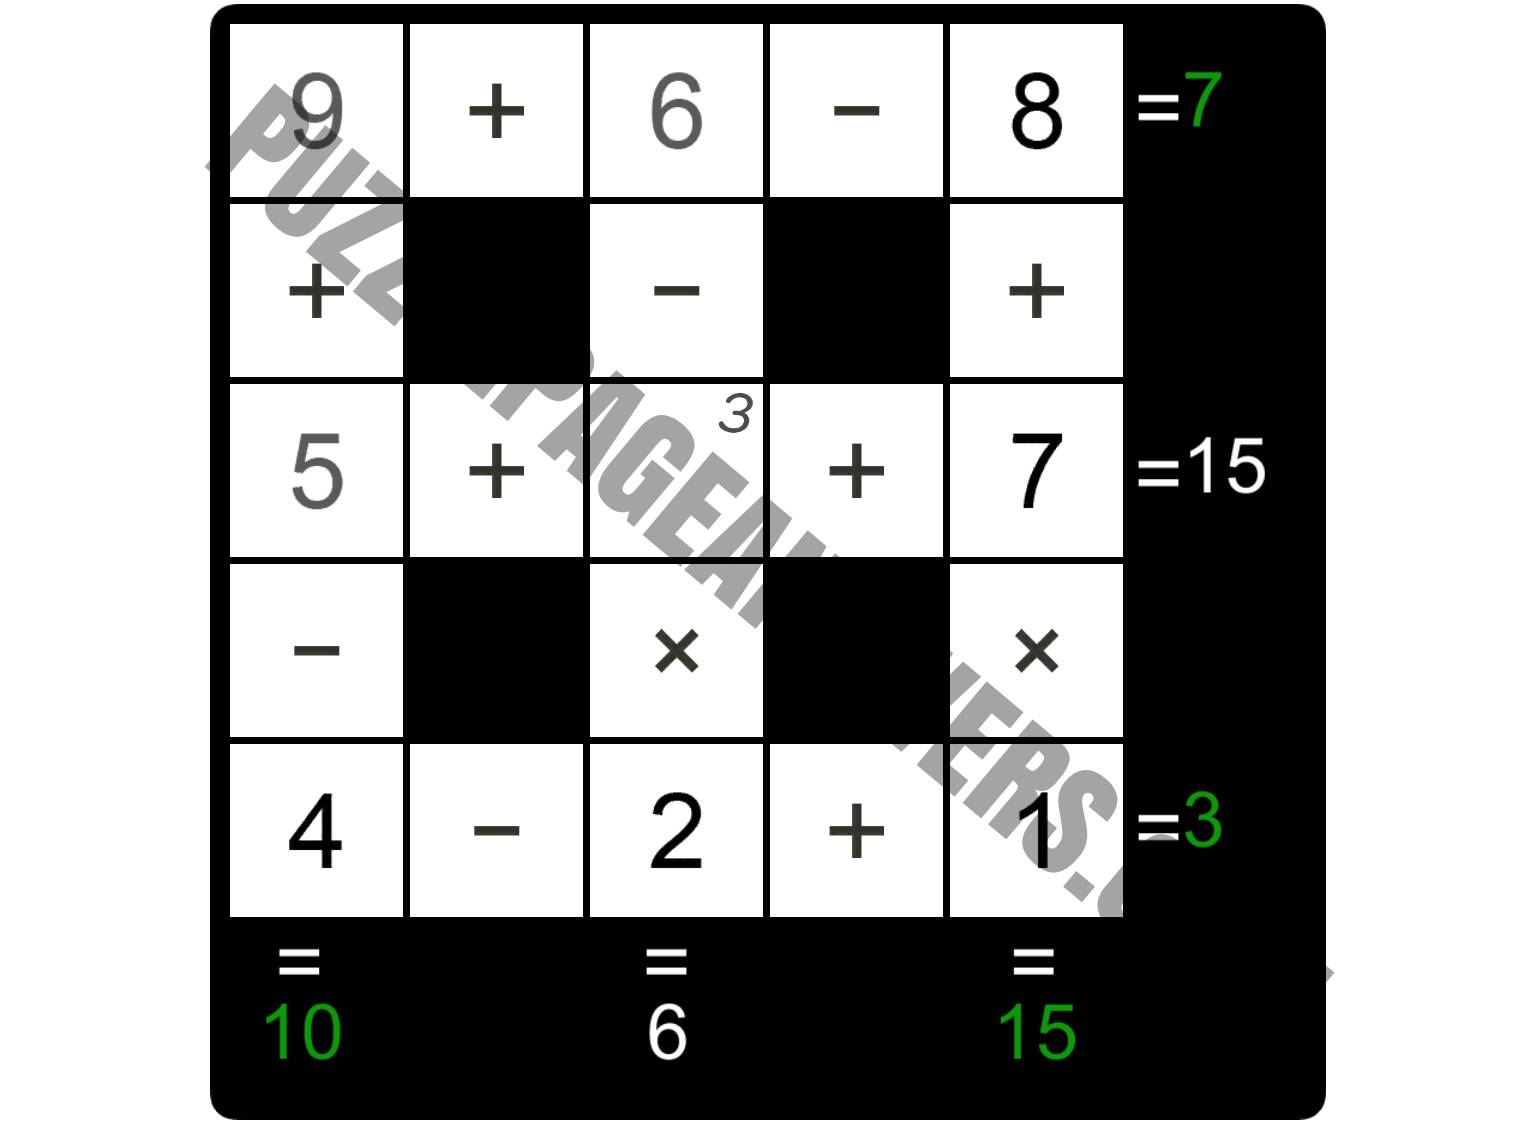 Puzzle Page Cross Sum July 24 2022 Answers PuzzlePageAnswers com